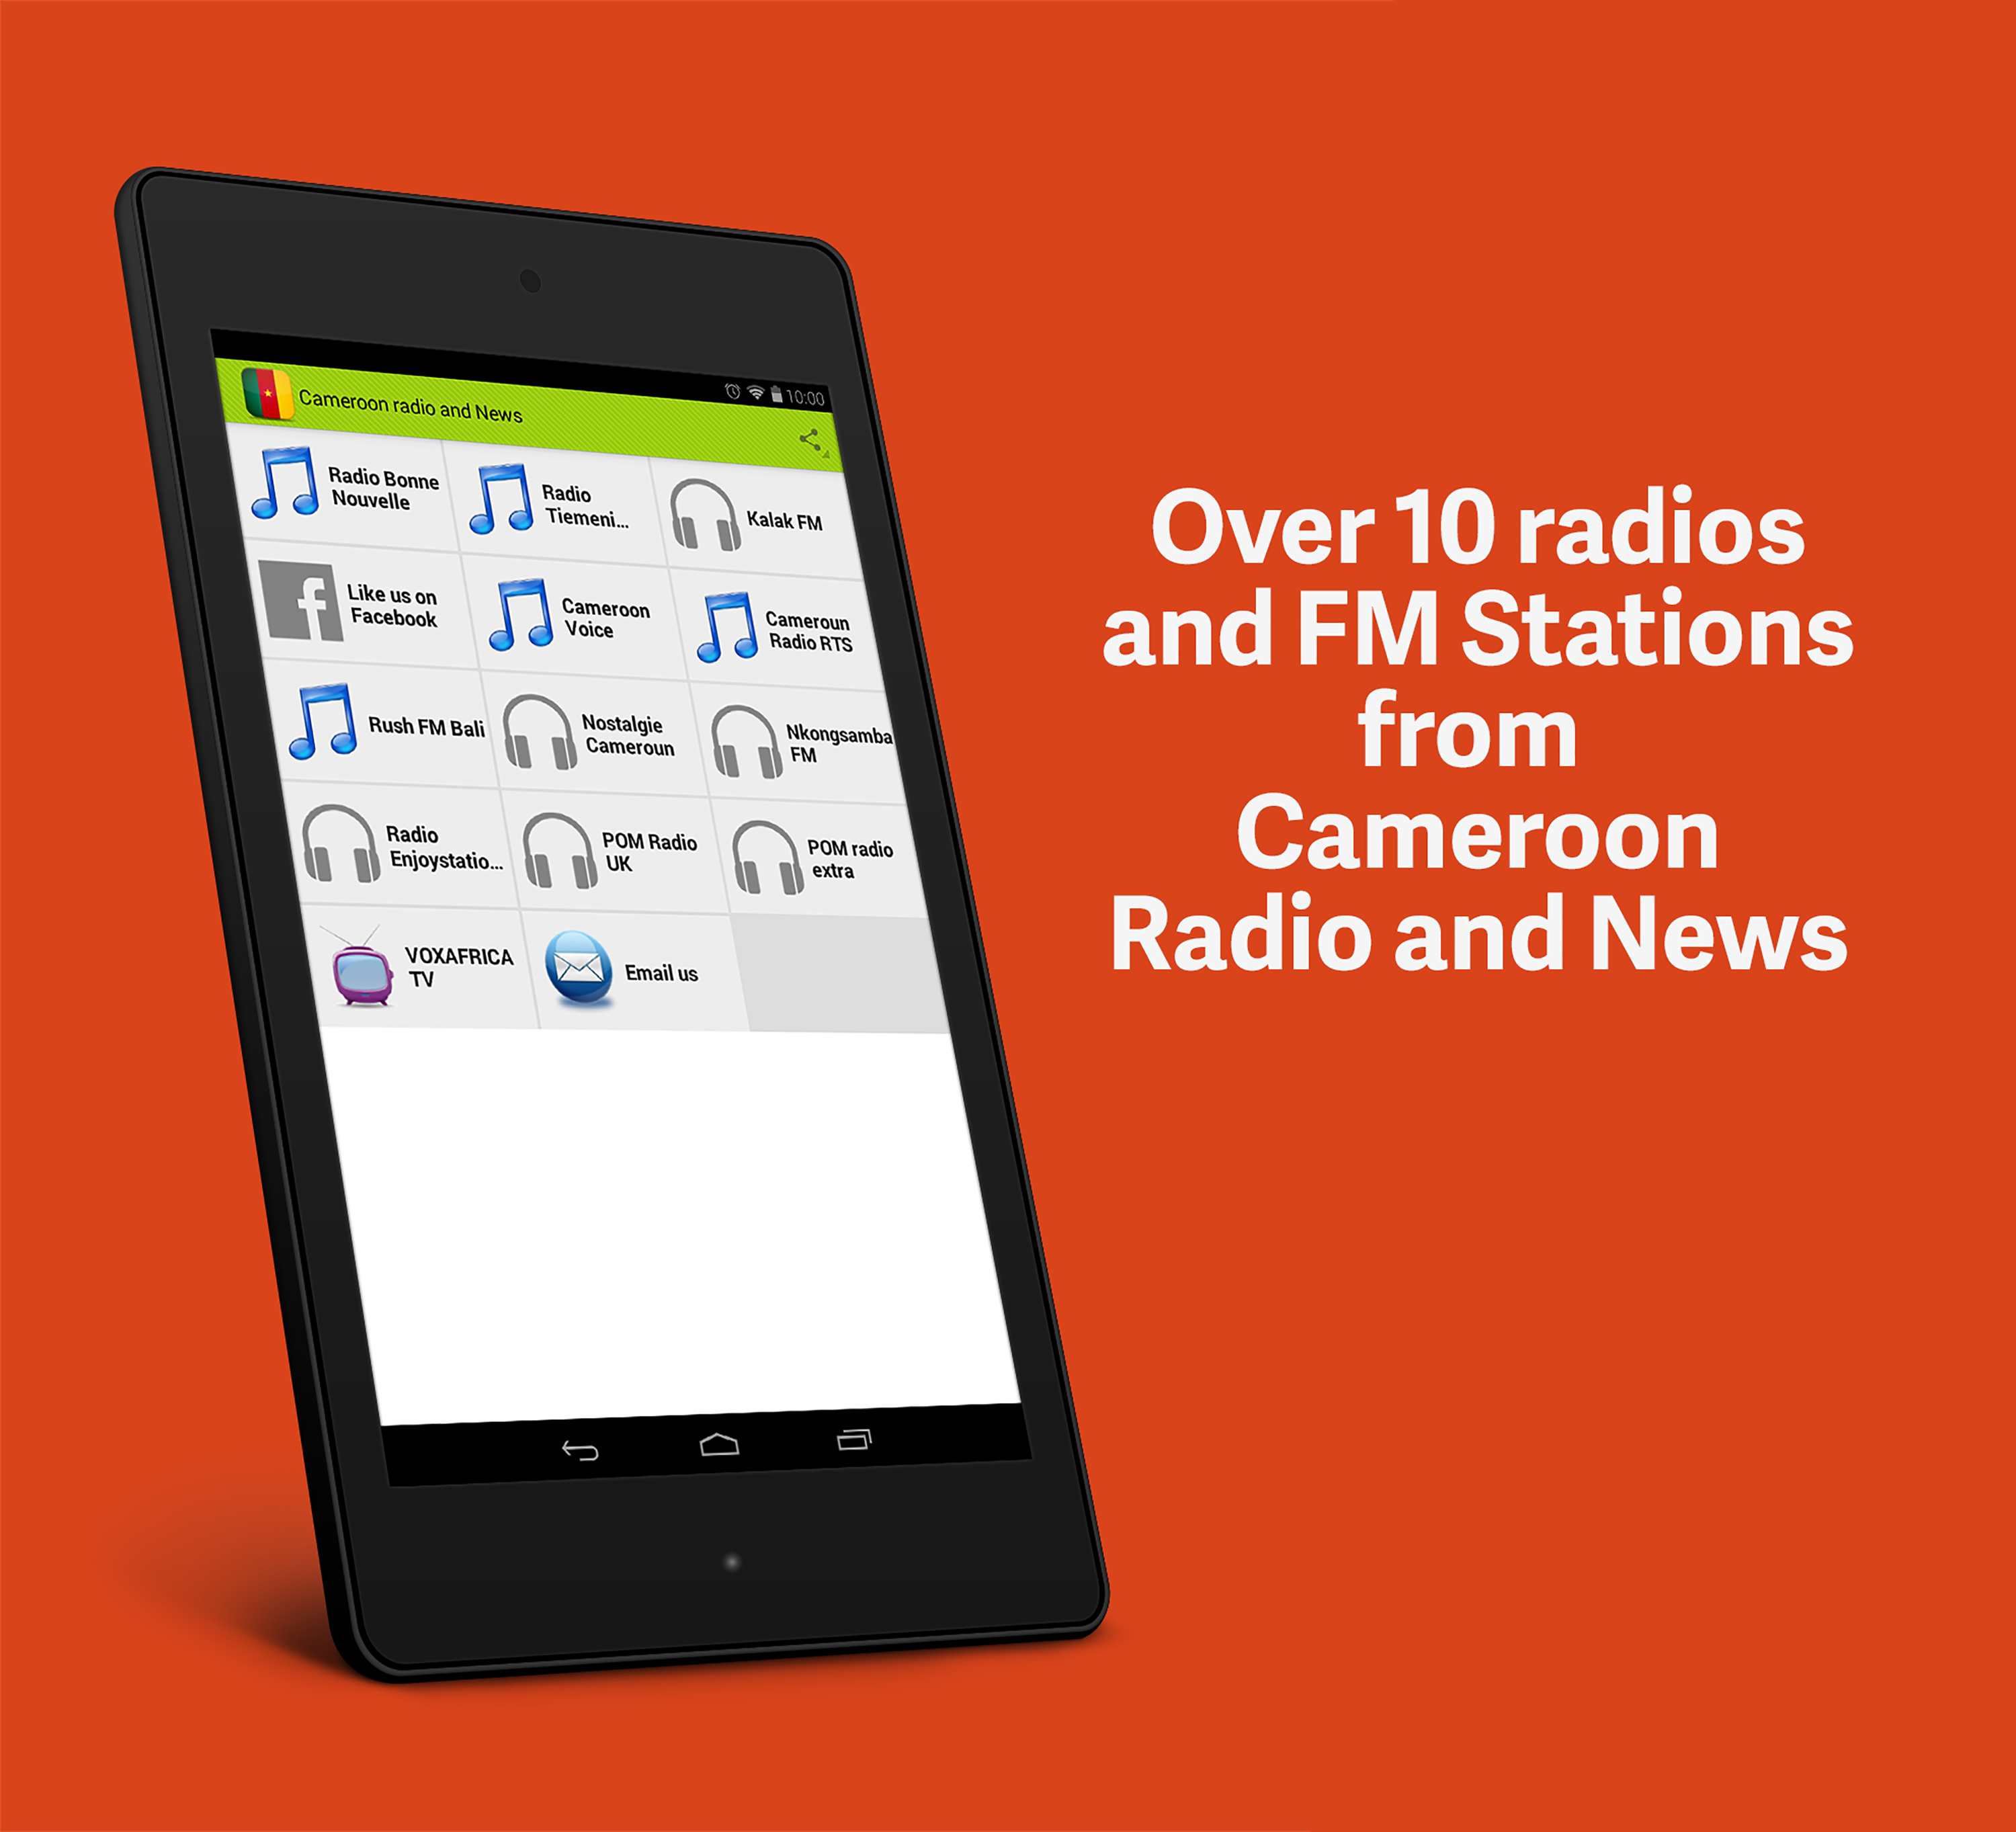 Cameroon Radio APK 2.2 for Android – Download Cameroon Radio APK Latest  Version from APKFab.com